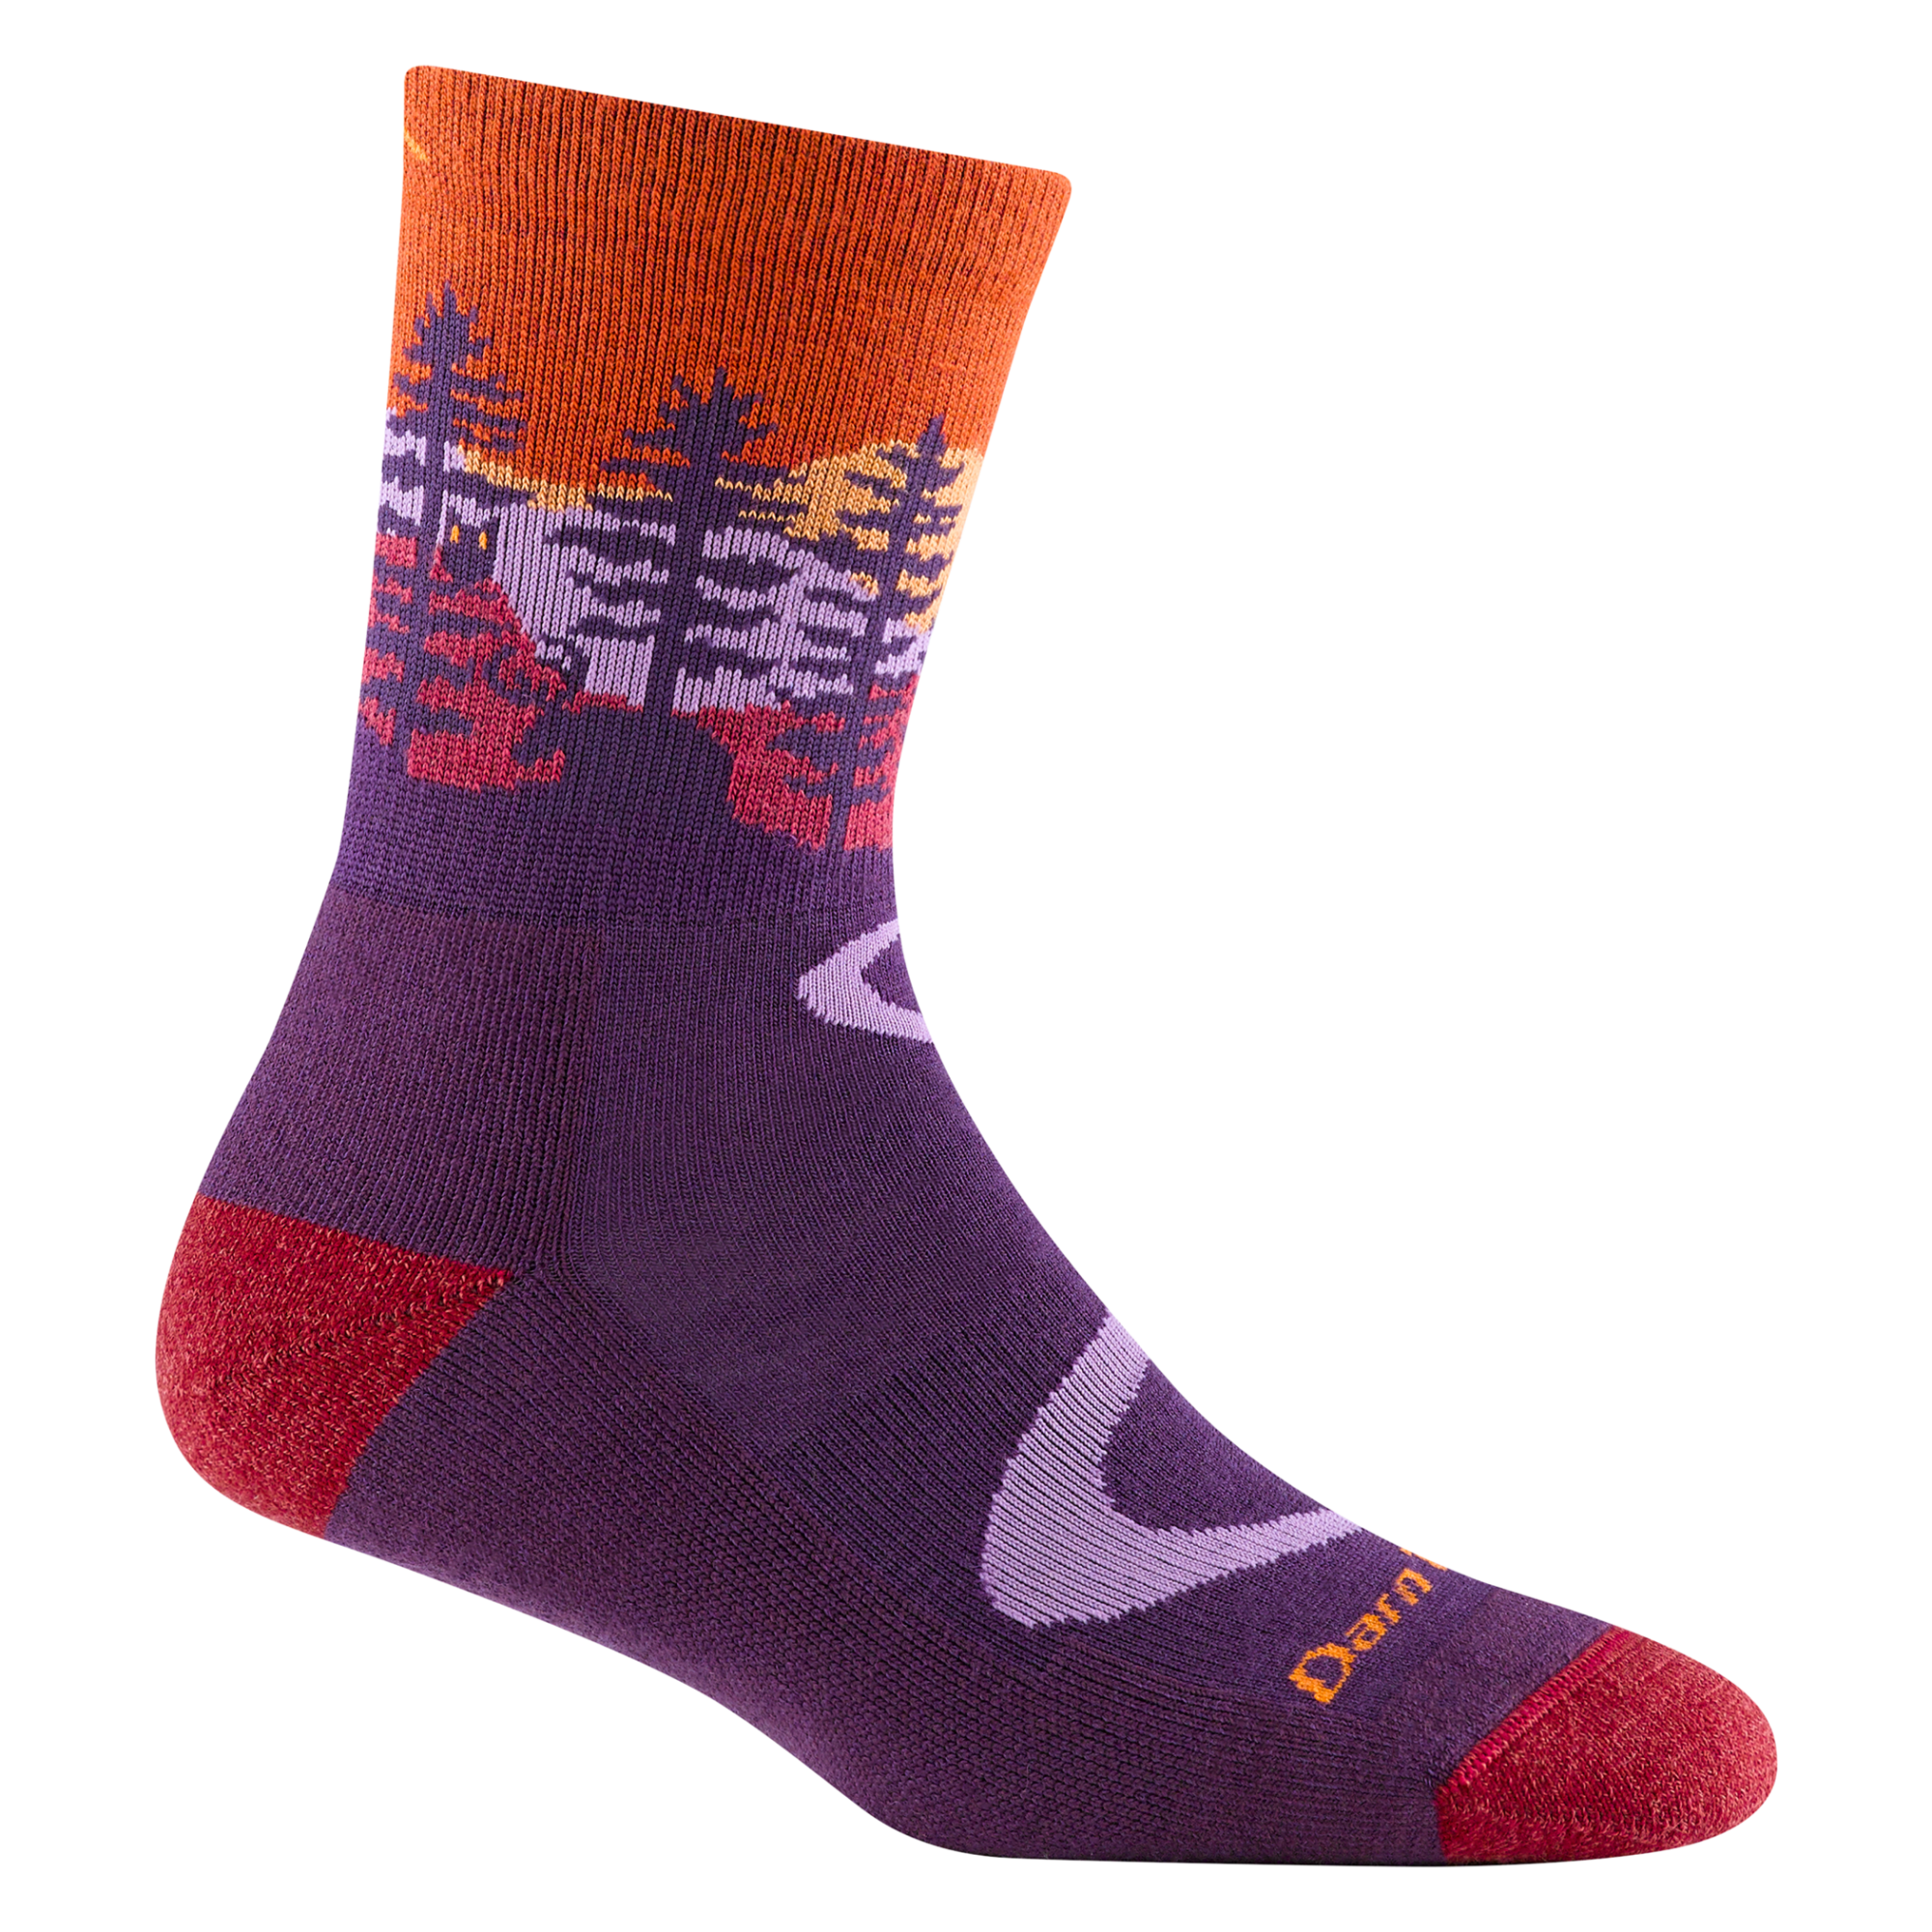 reverse 5013 women's northwoods micro crew hiking sock in nightshade with a red toe/heel accents and a moose and tree design on the ankle